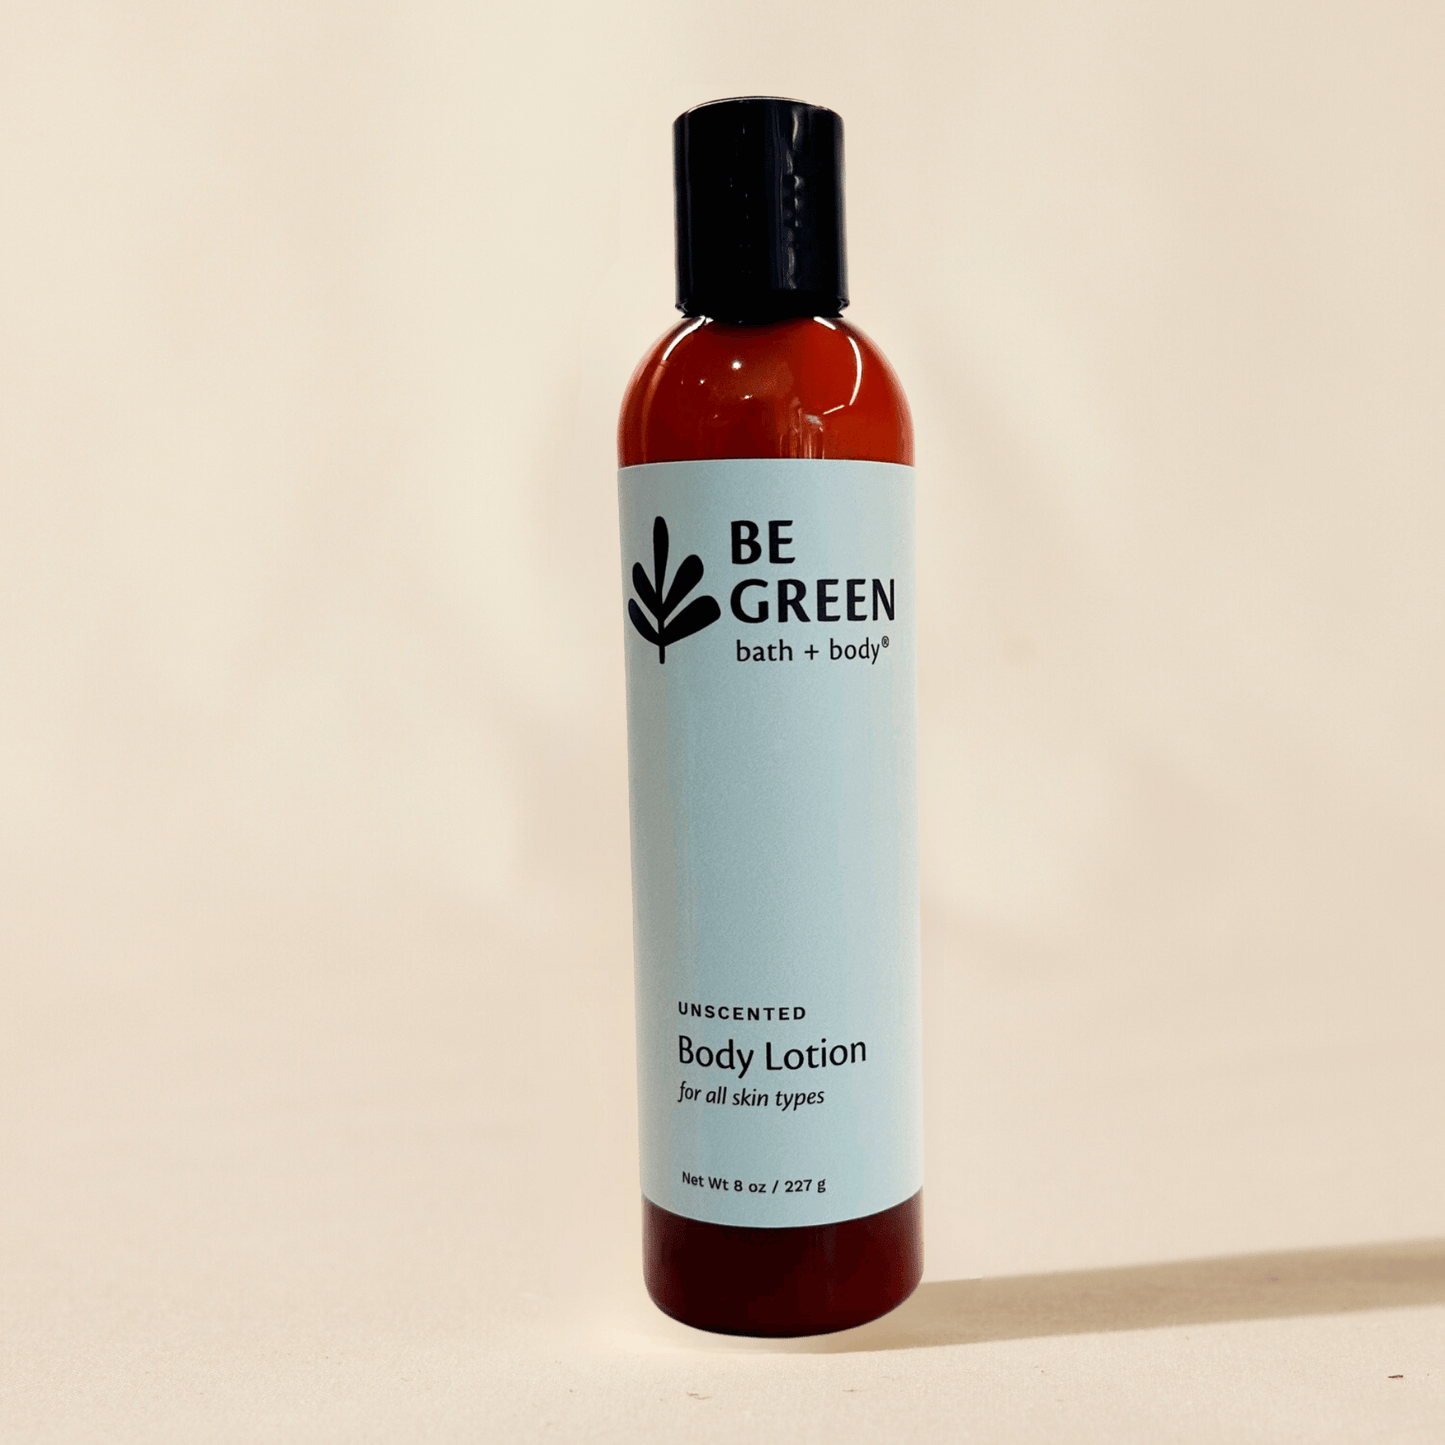 EWG Verified natural unscented body lotion for all skin types in an amber bottle